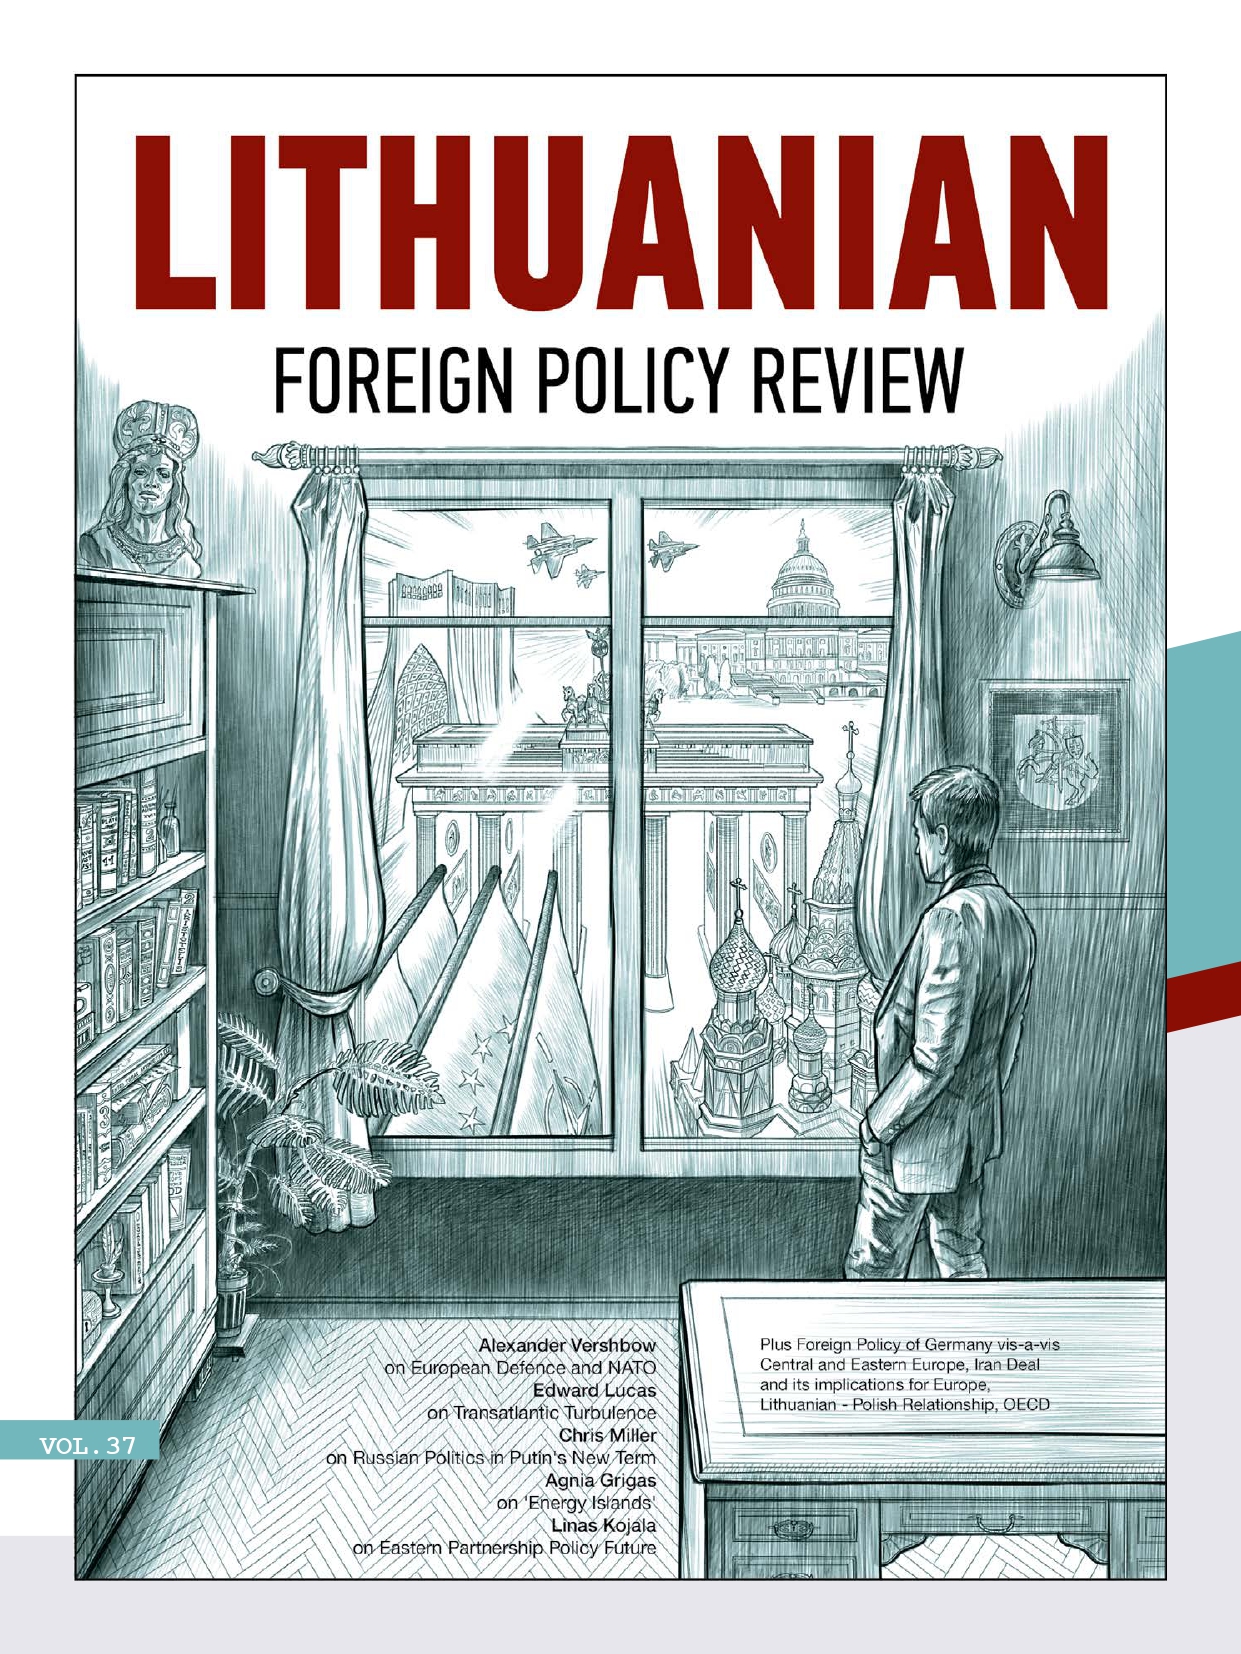 How to Save The Golden Fall of Lithuania & Poland? Cover Image